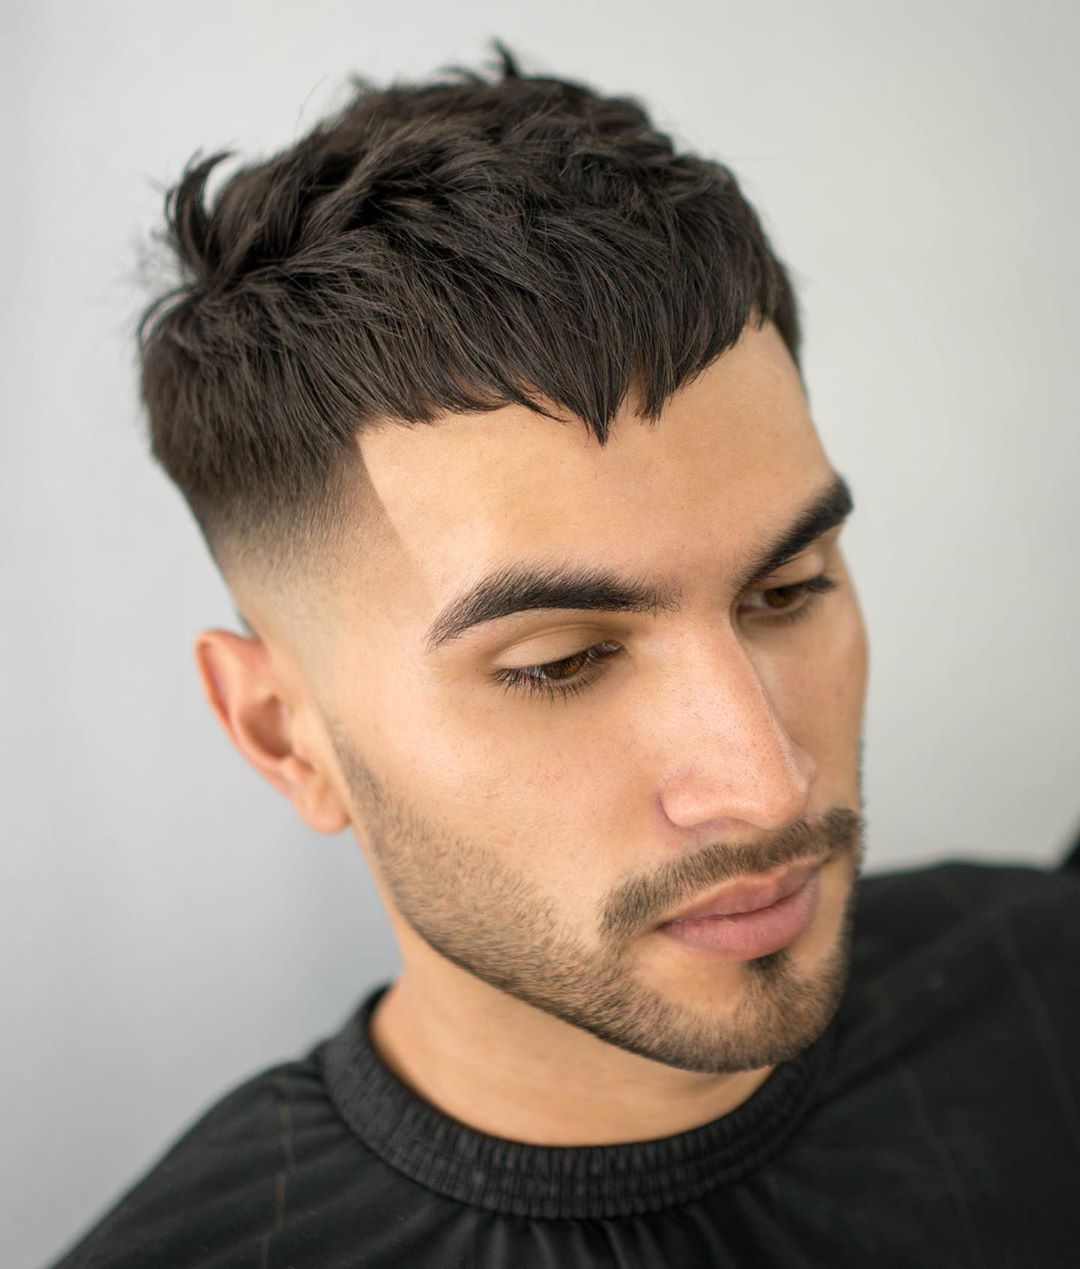 50+ Short Haircuts For Men -> Popular Styles For August 2020